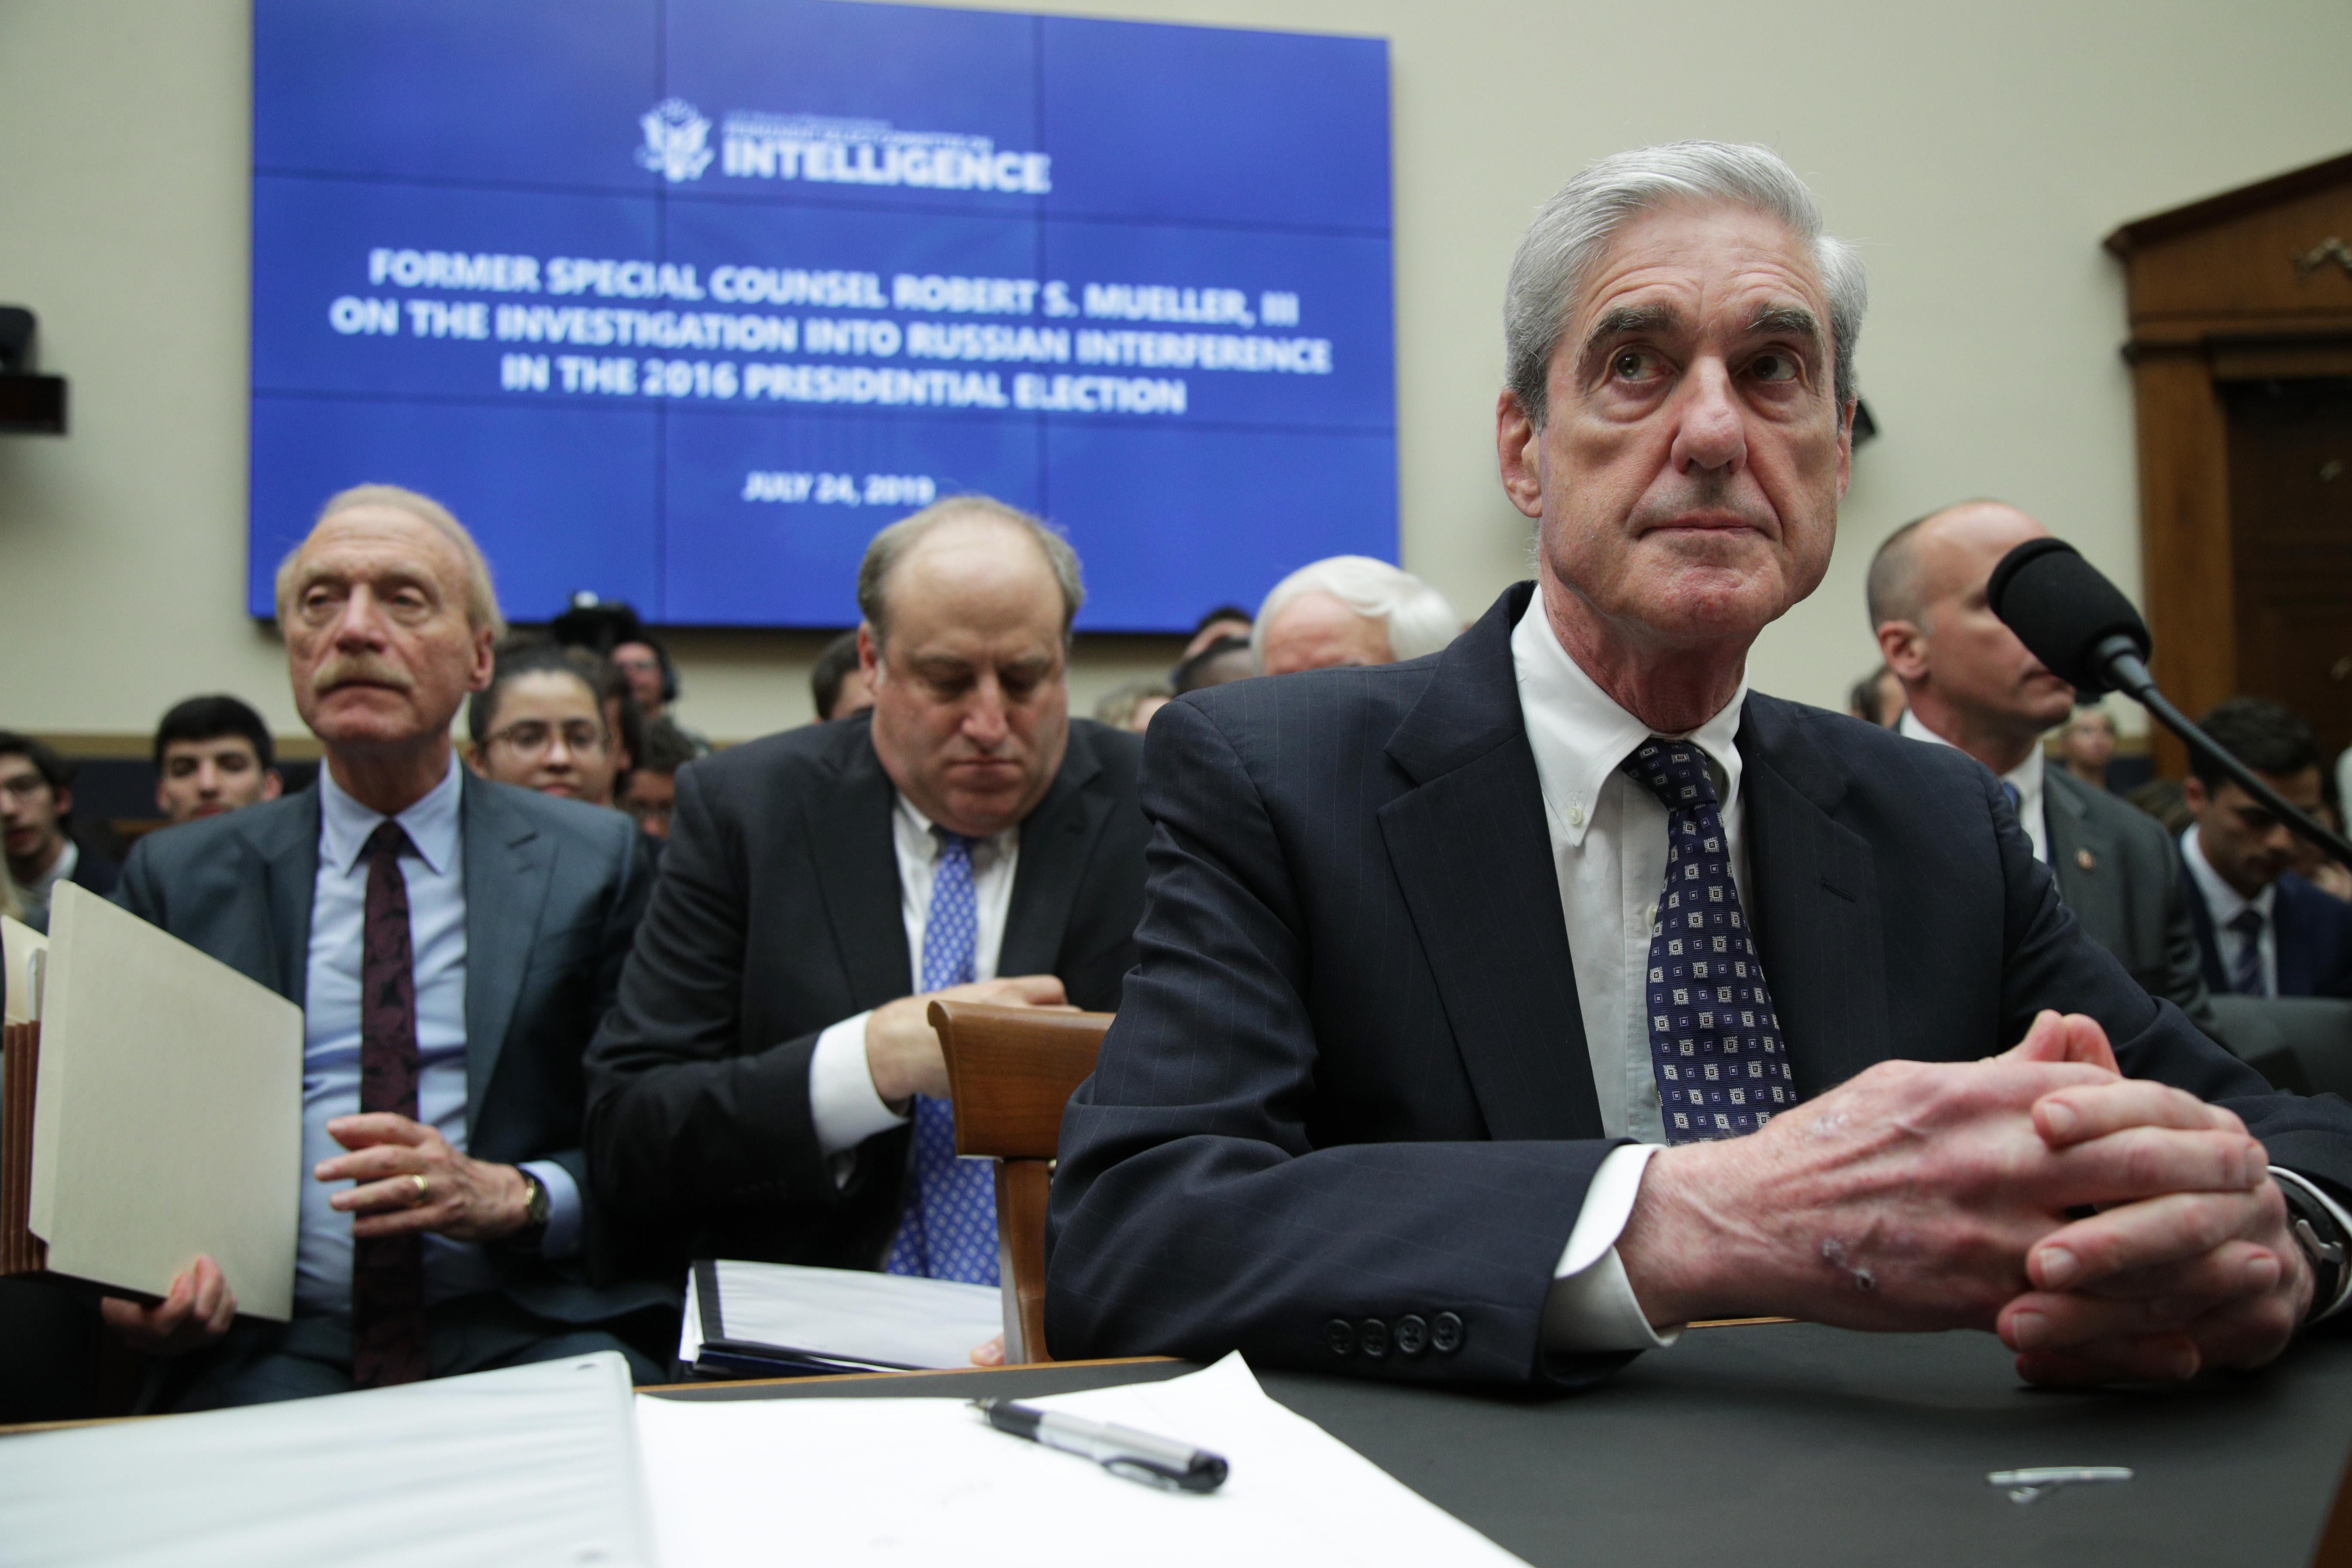 Robert Mueller testifies before the House Intelligence Committee about his report on Russian interference in the 2016 election on July 24 in Washington, D.C.